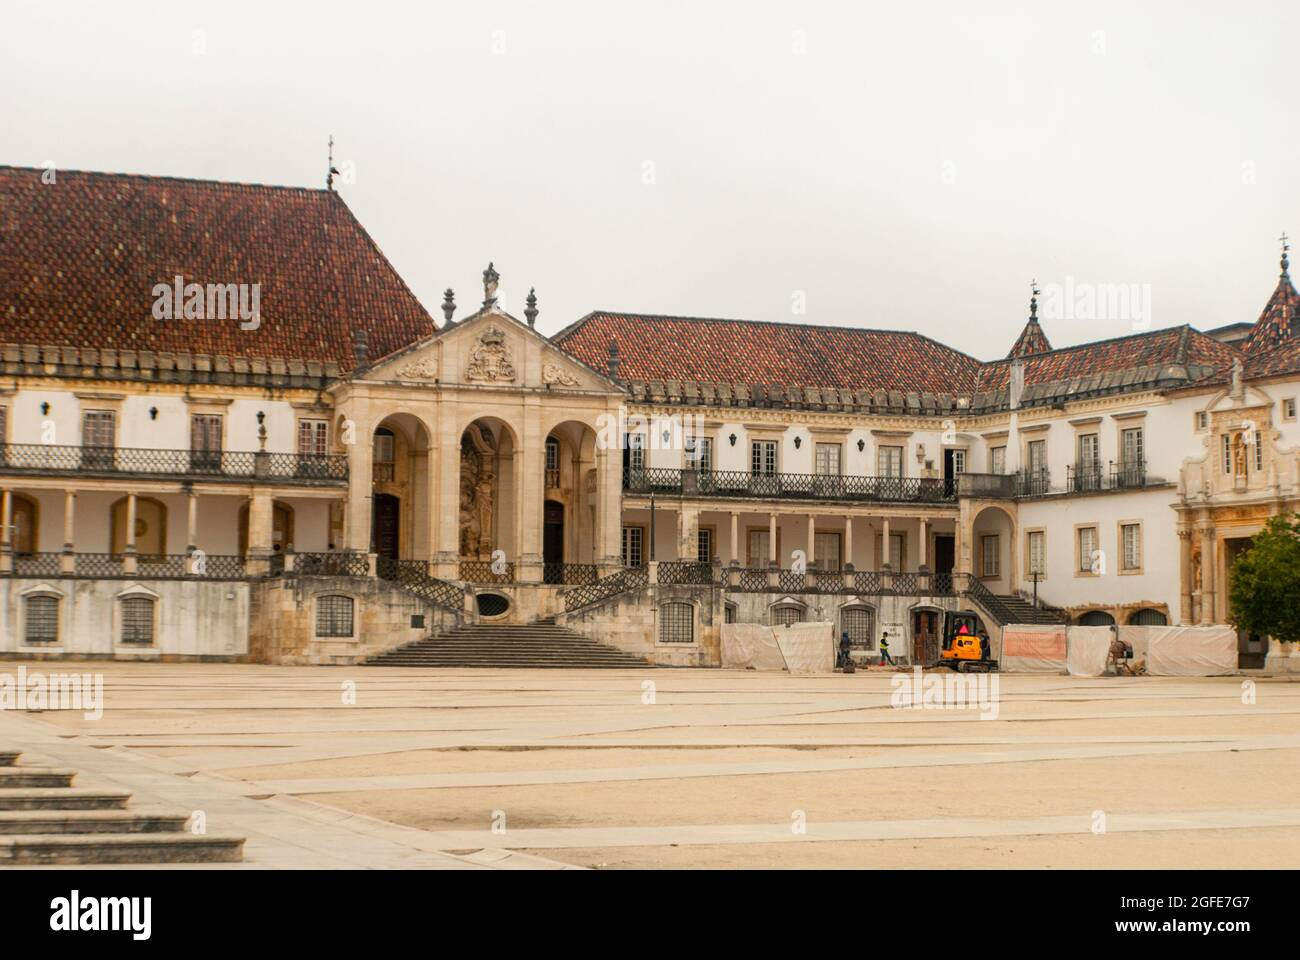 University of Coimbra Faculty of Law at the empty Paco das Escolas Square on a cloudy day - Coimbra, Portugal Stock Photo